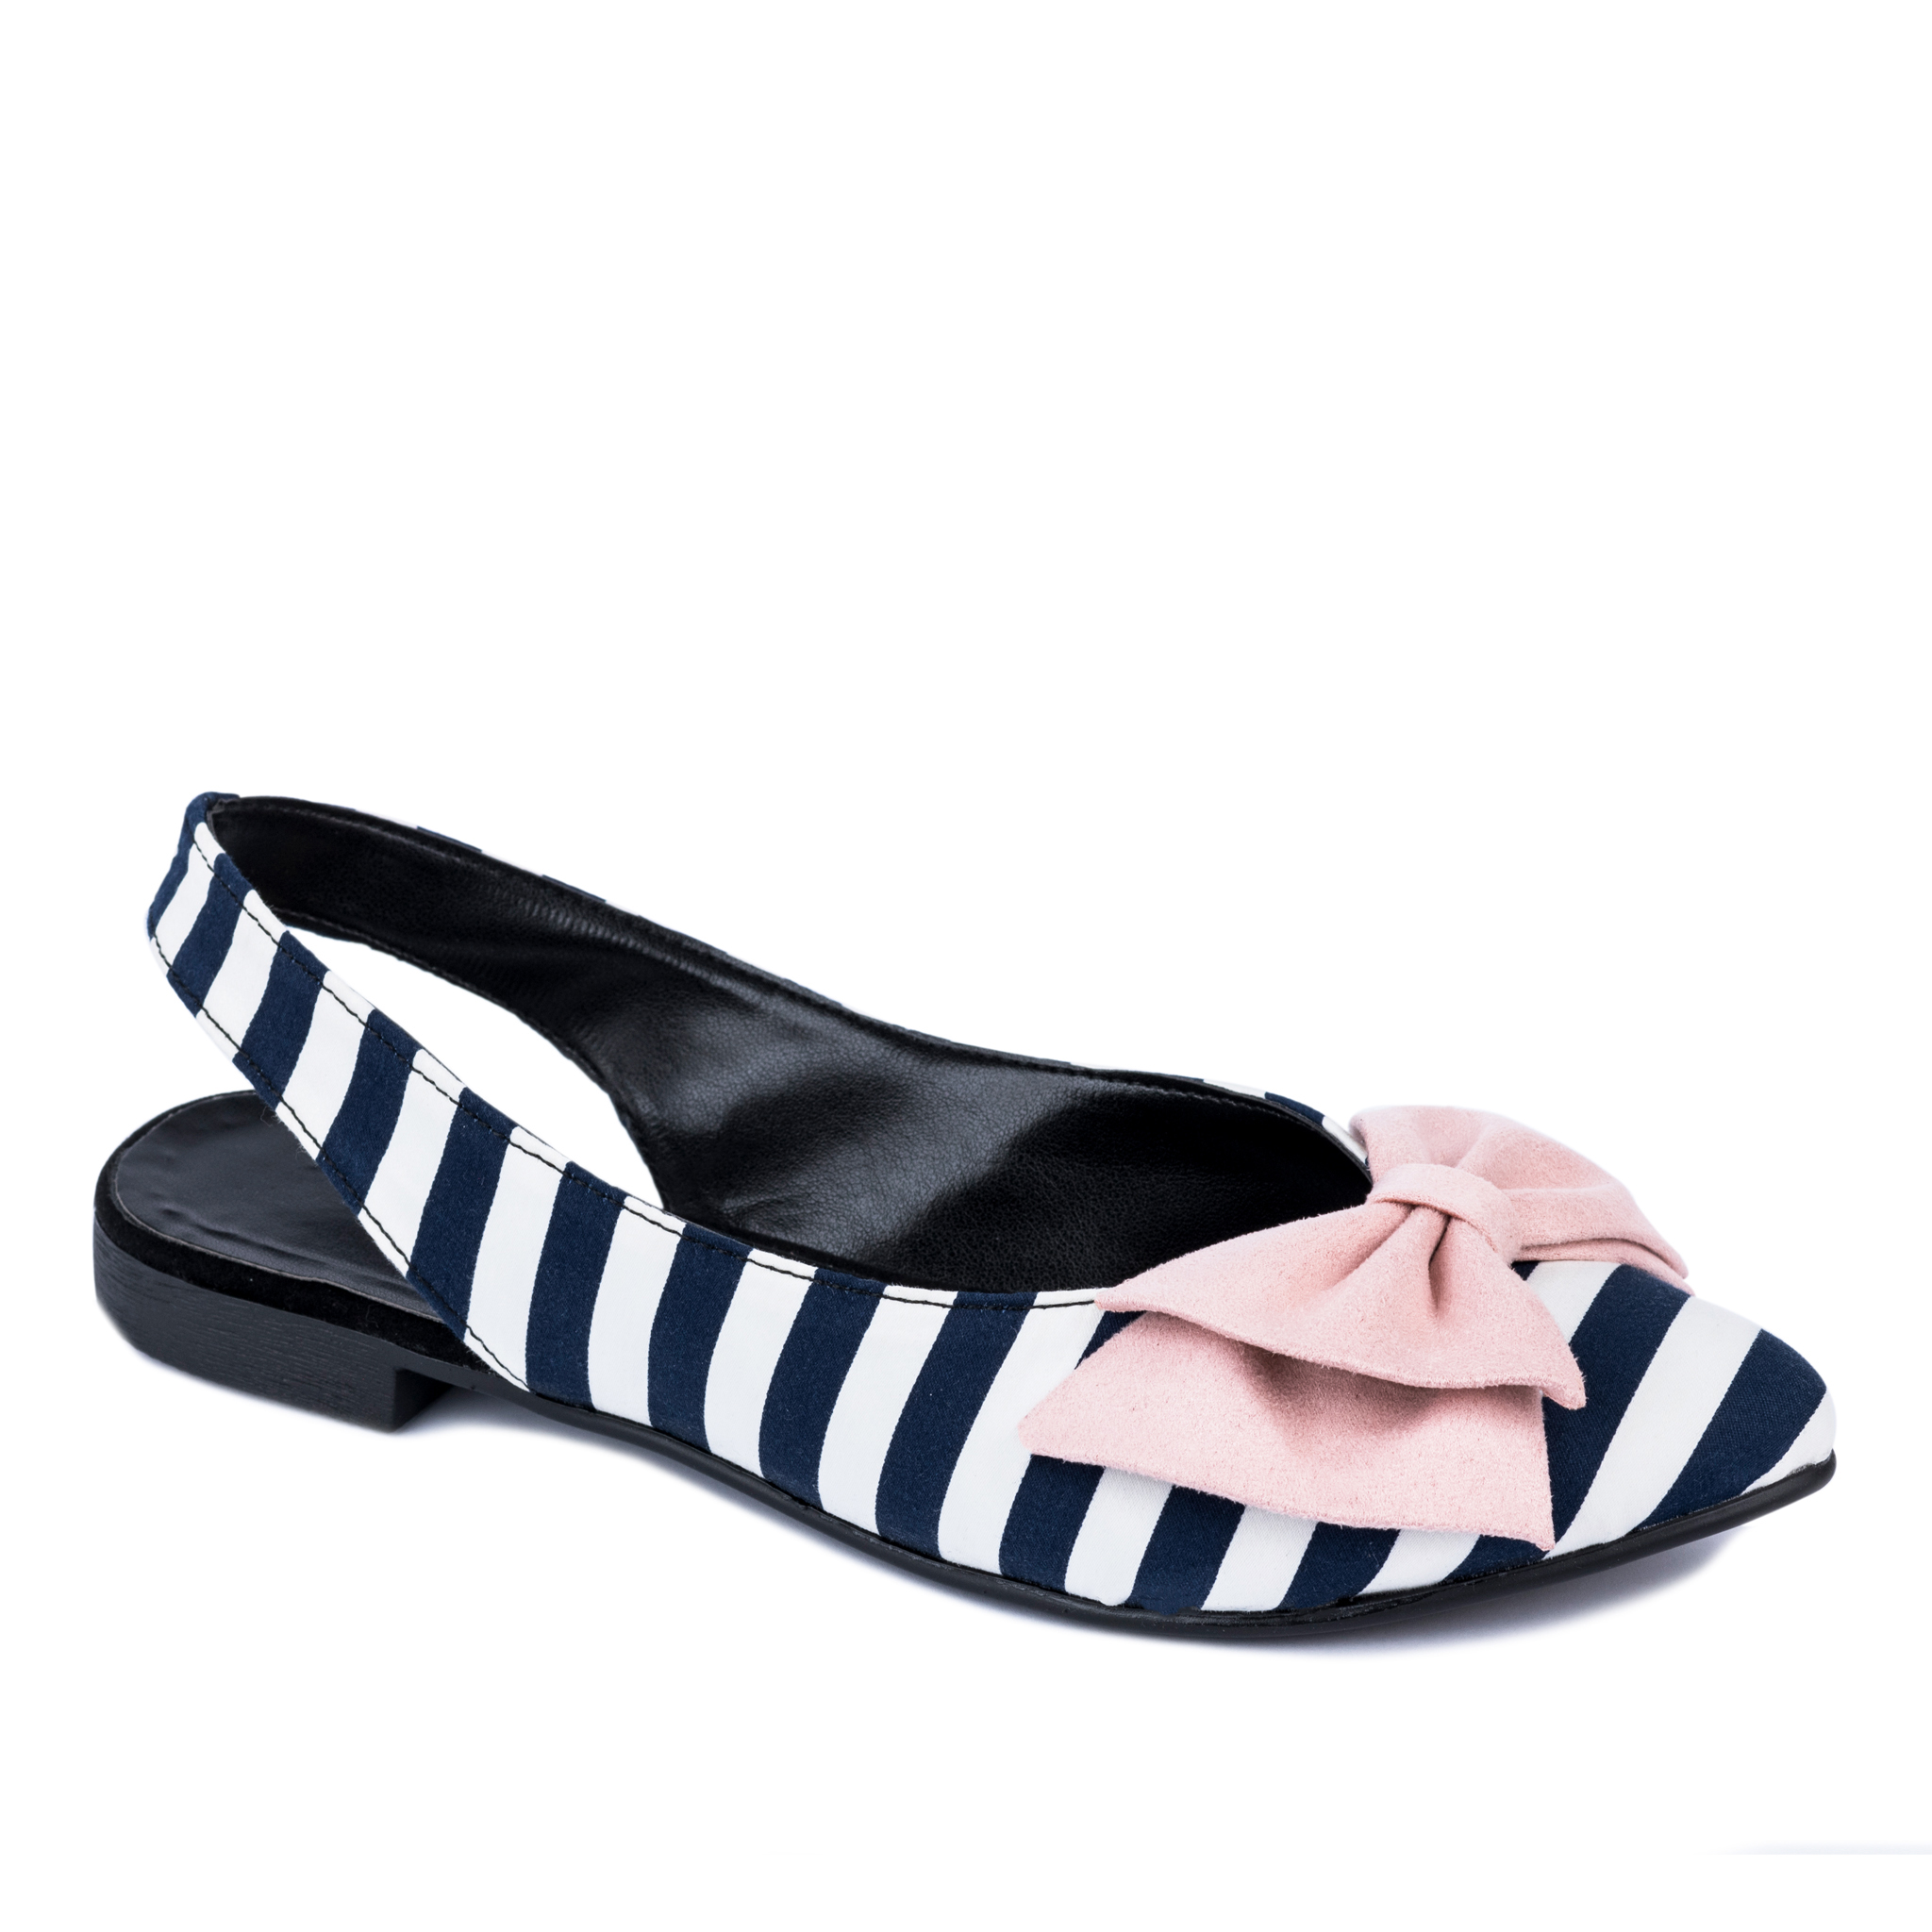 FLATS WITH STRAPS AND ROSE BOW - NAVY BLUE/WHITE